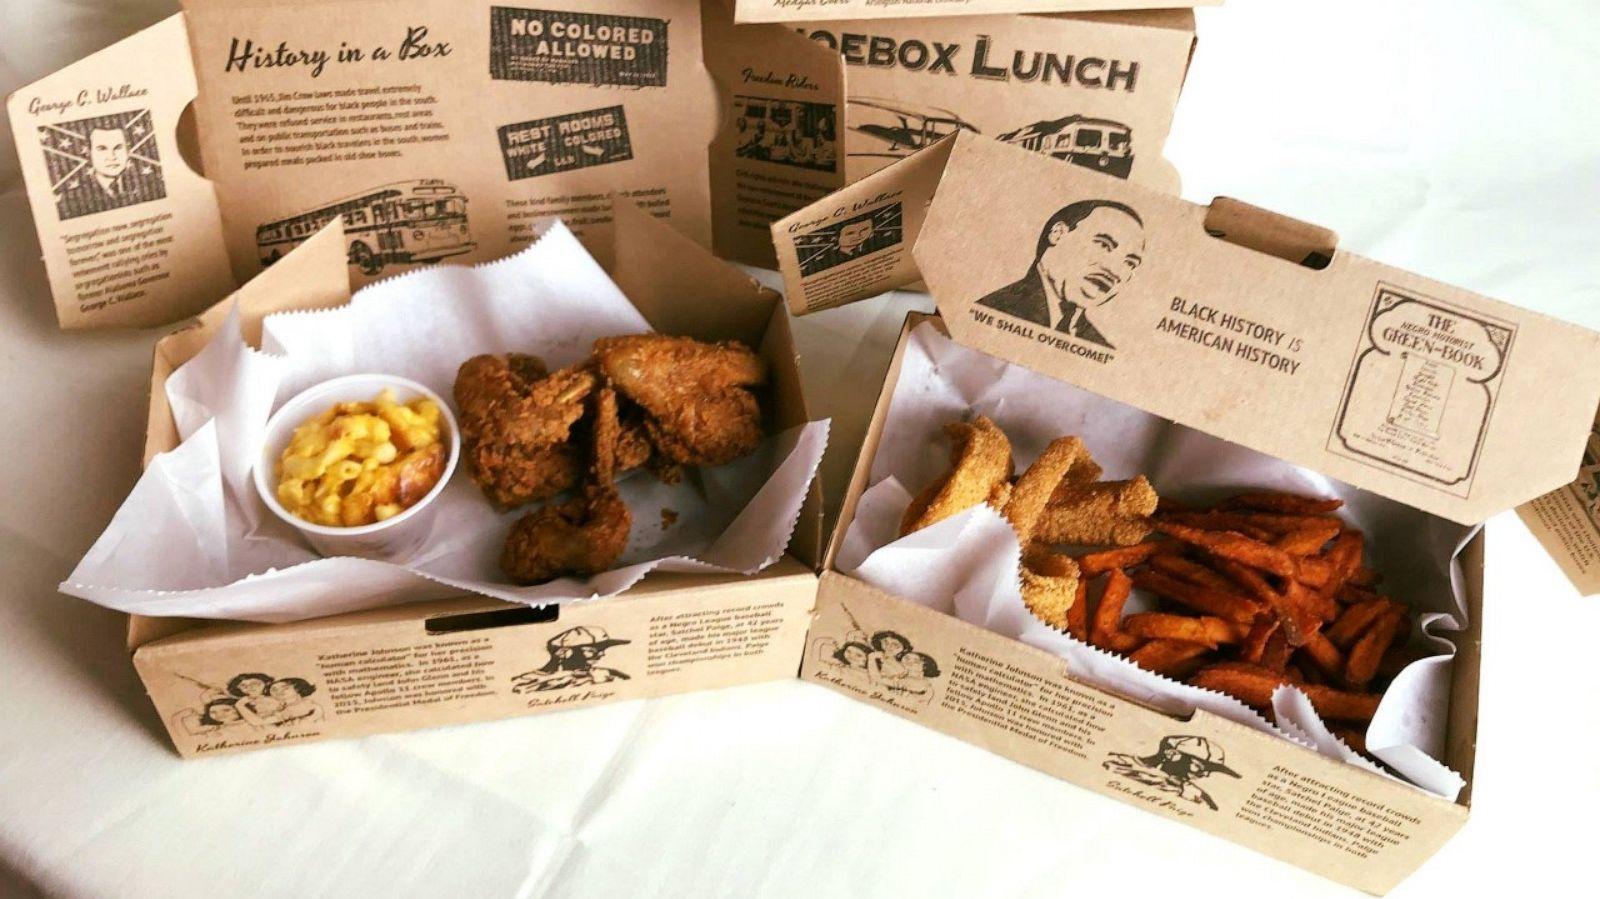 Soul Food Restaurant Serves Shoebox Lunches With Black History